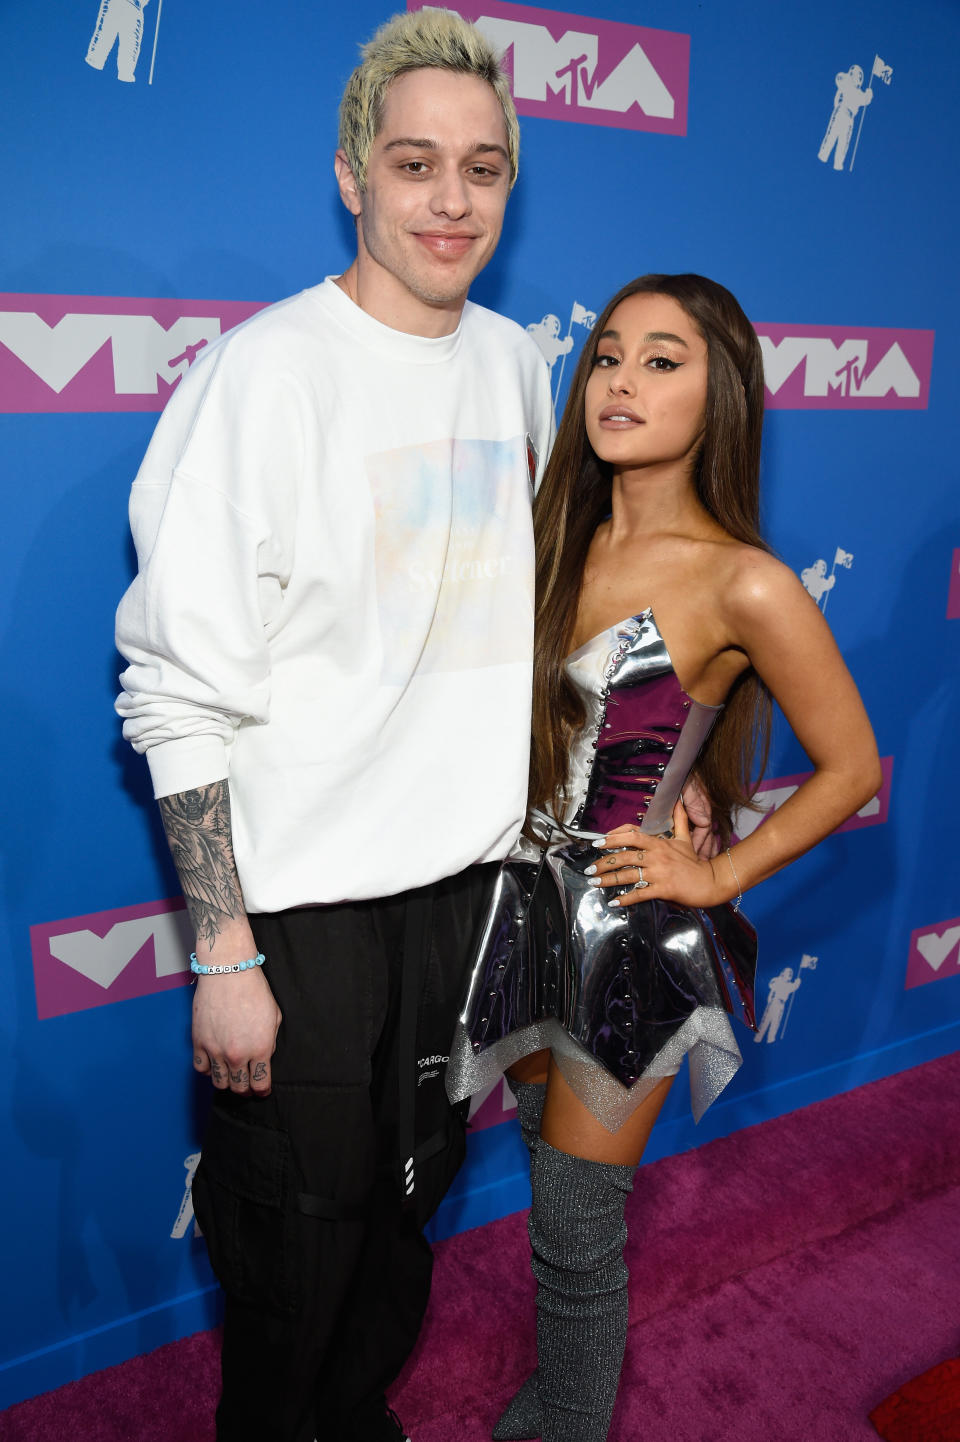 Pete Davidson and Ariana Grande attend the 2018 MTV Video Music Awards. (Photo: Kevin Mazur via Getty Images)